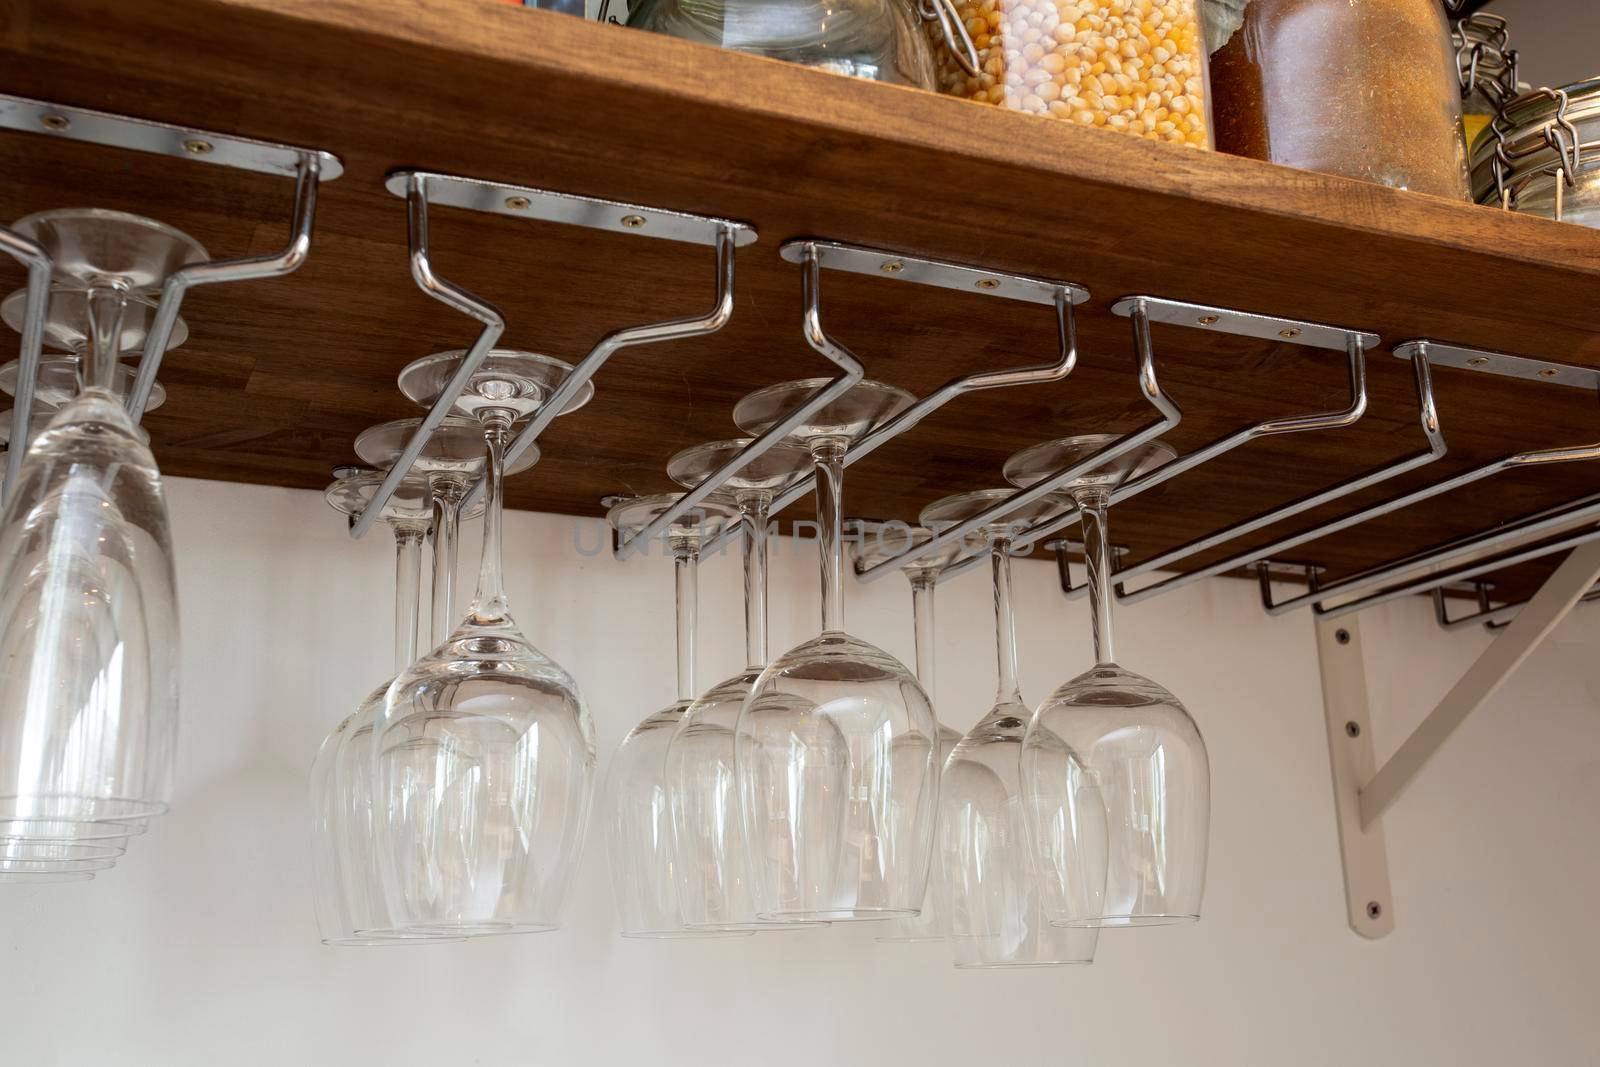 Wine glasses hanging in holder. organized inside cupboard. home interior storage close up